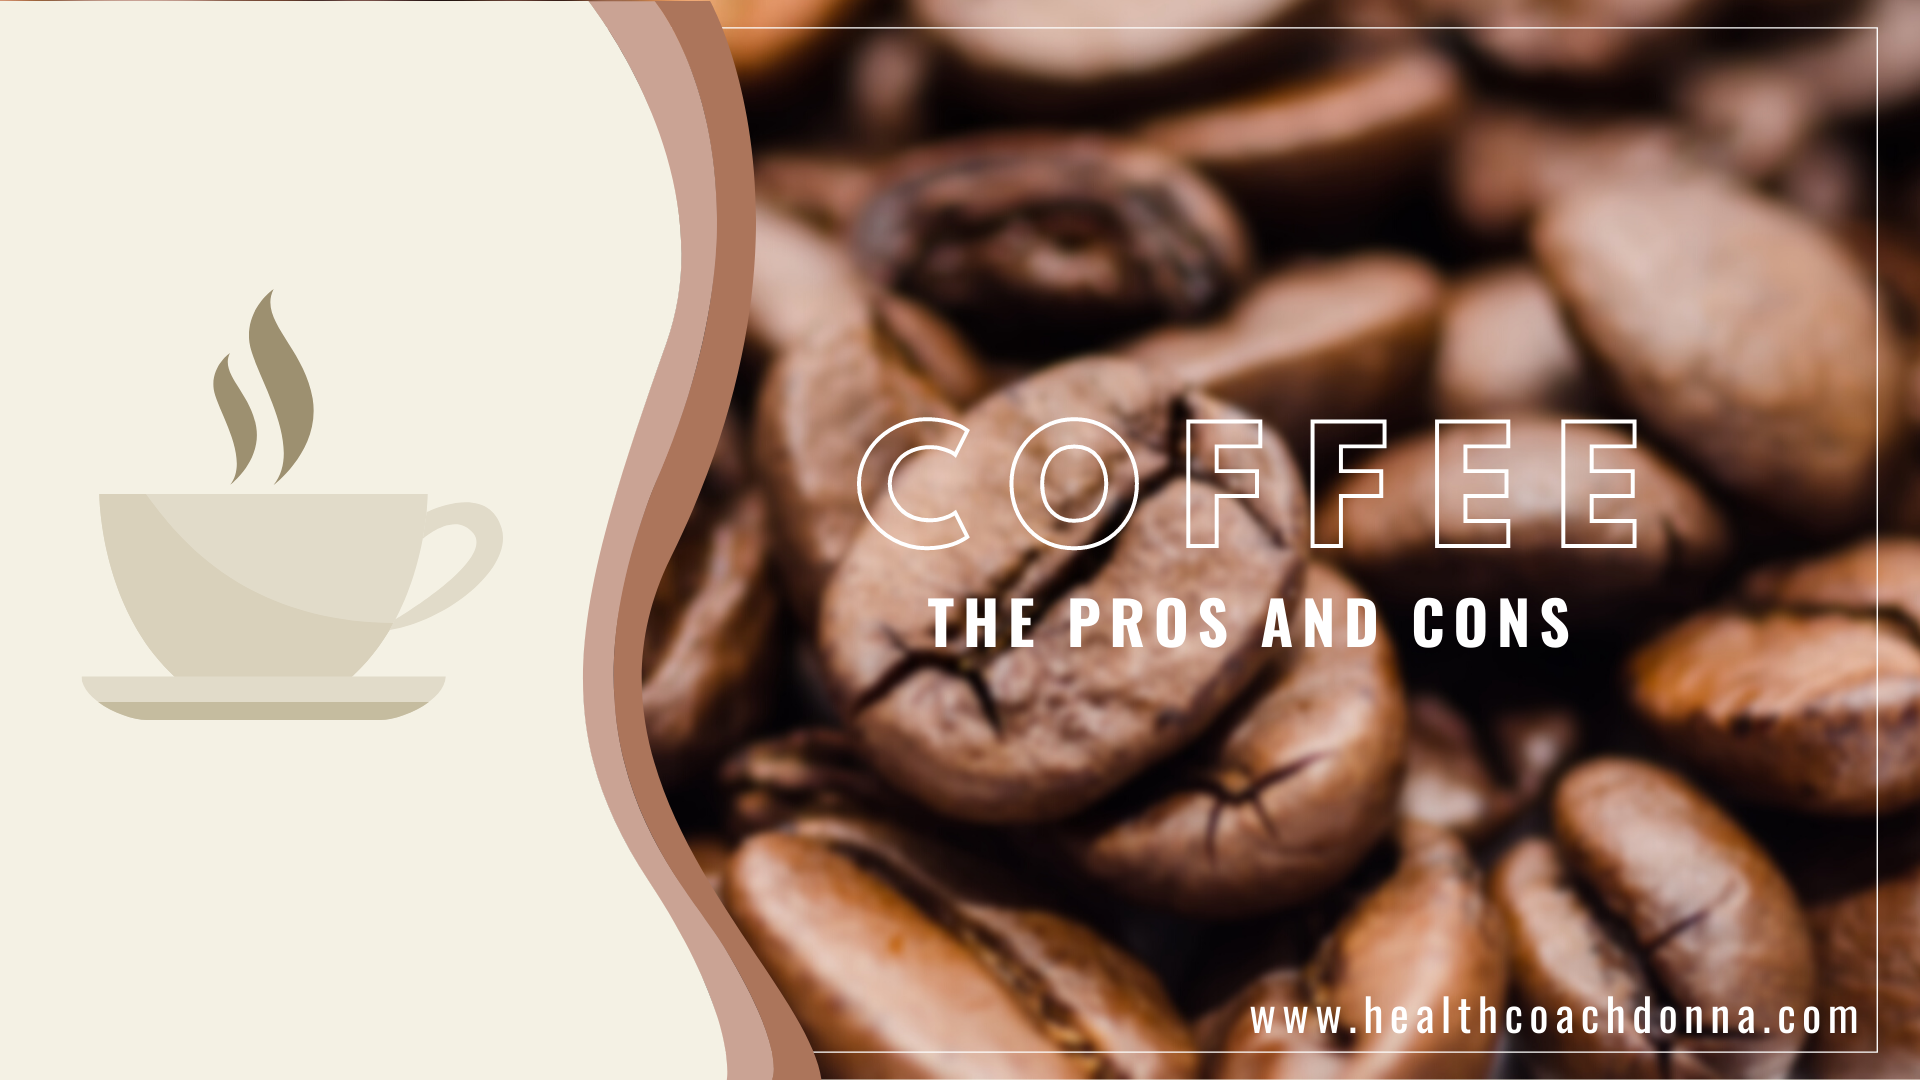 http://healthcoachdonna.com/coffee-the-pros-and-cons